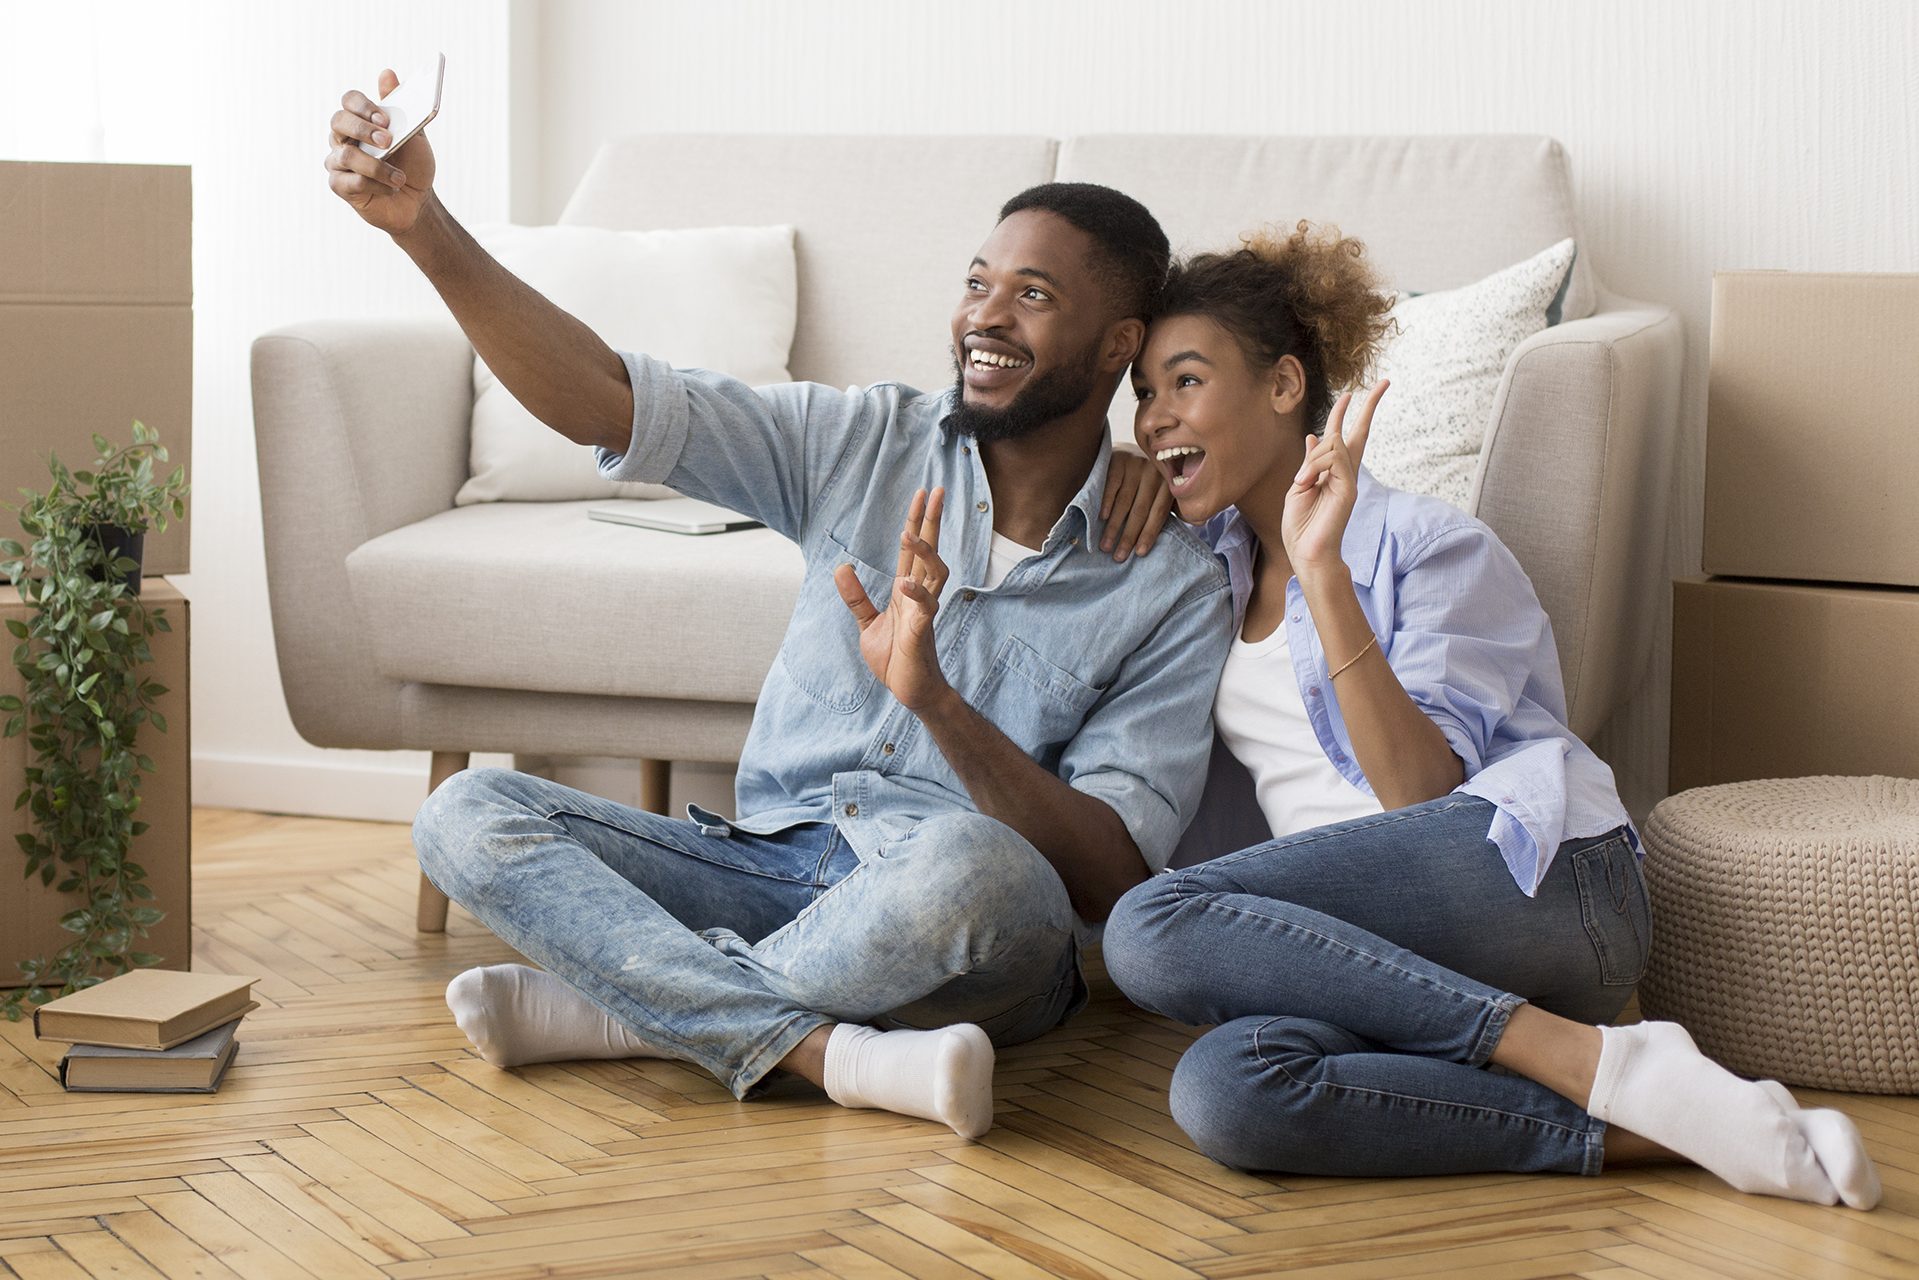 Here’s What You Should Know About Millennials and Home Buying